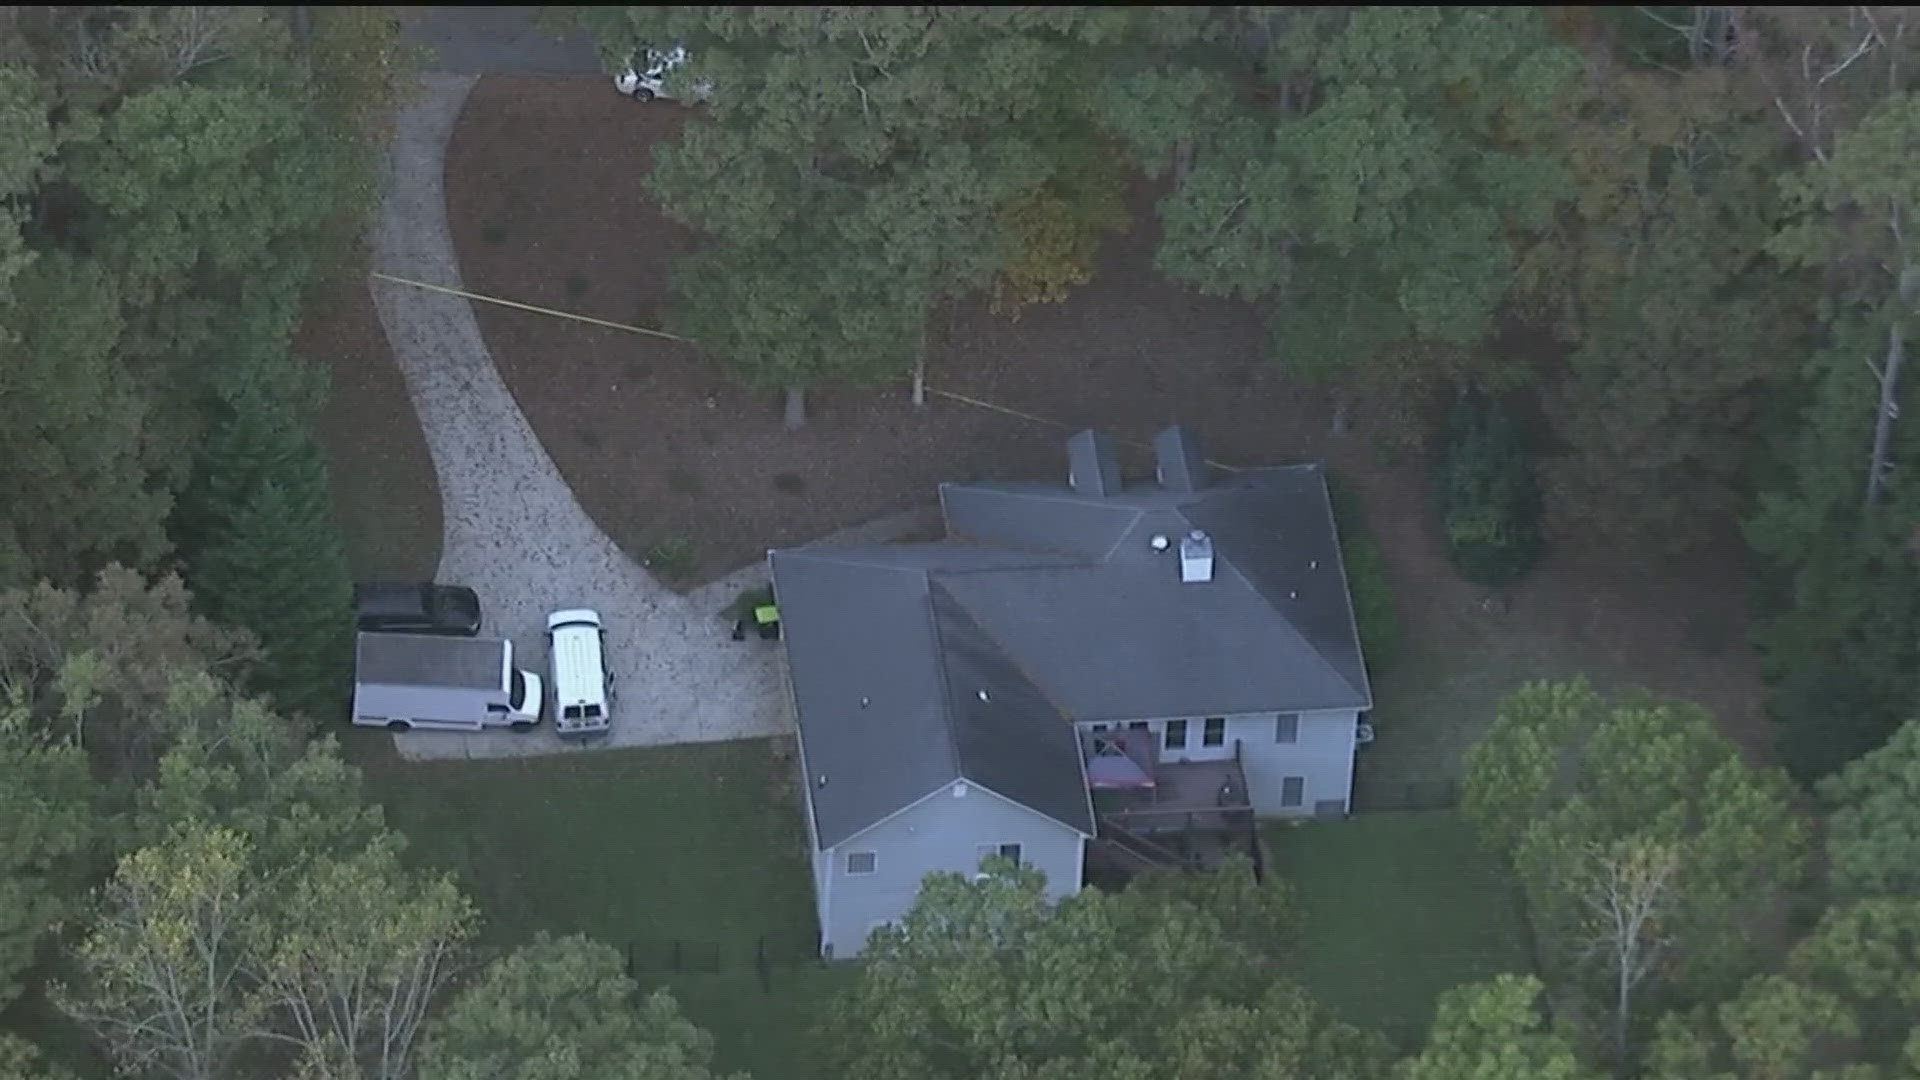 After deputies obtained a search warrant to enter the home, they found the woman inside.